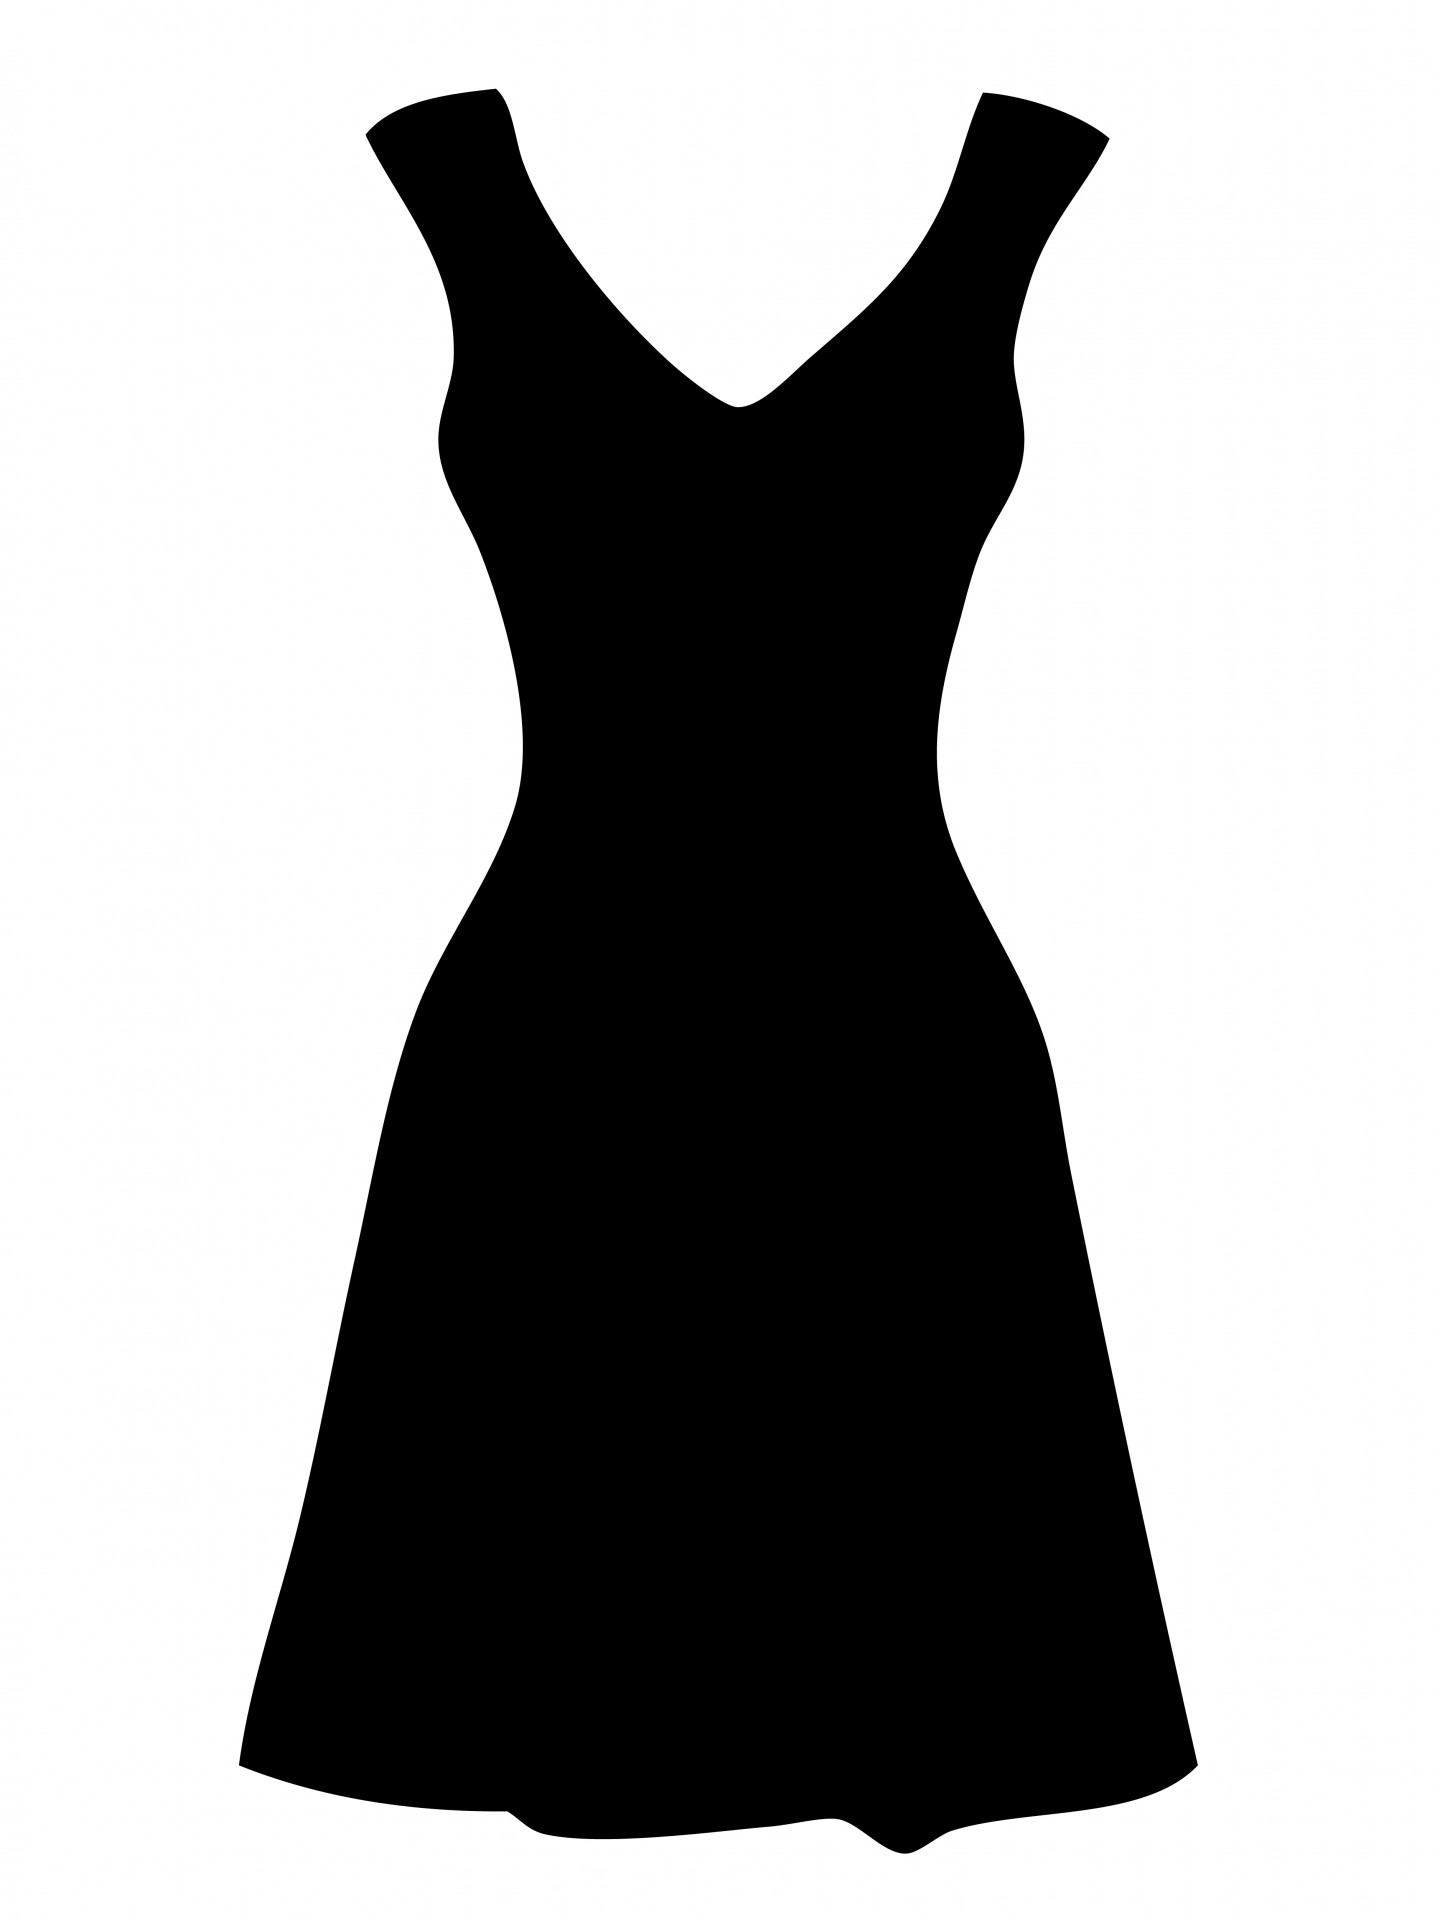 Dress clipart #12, Download drawings